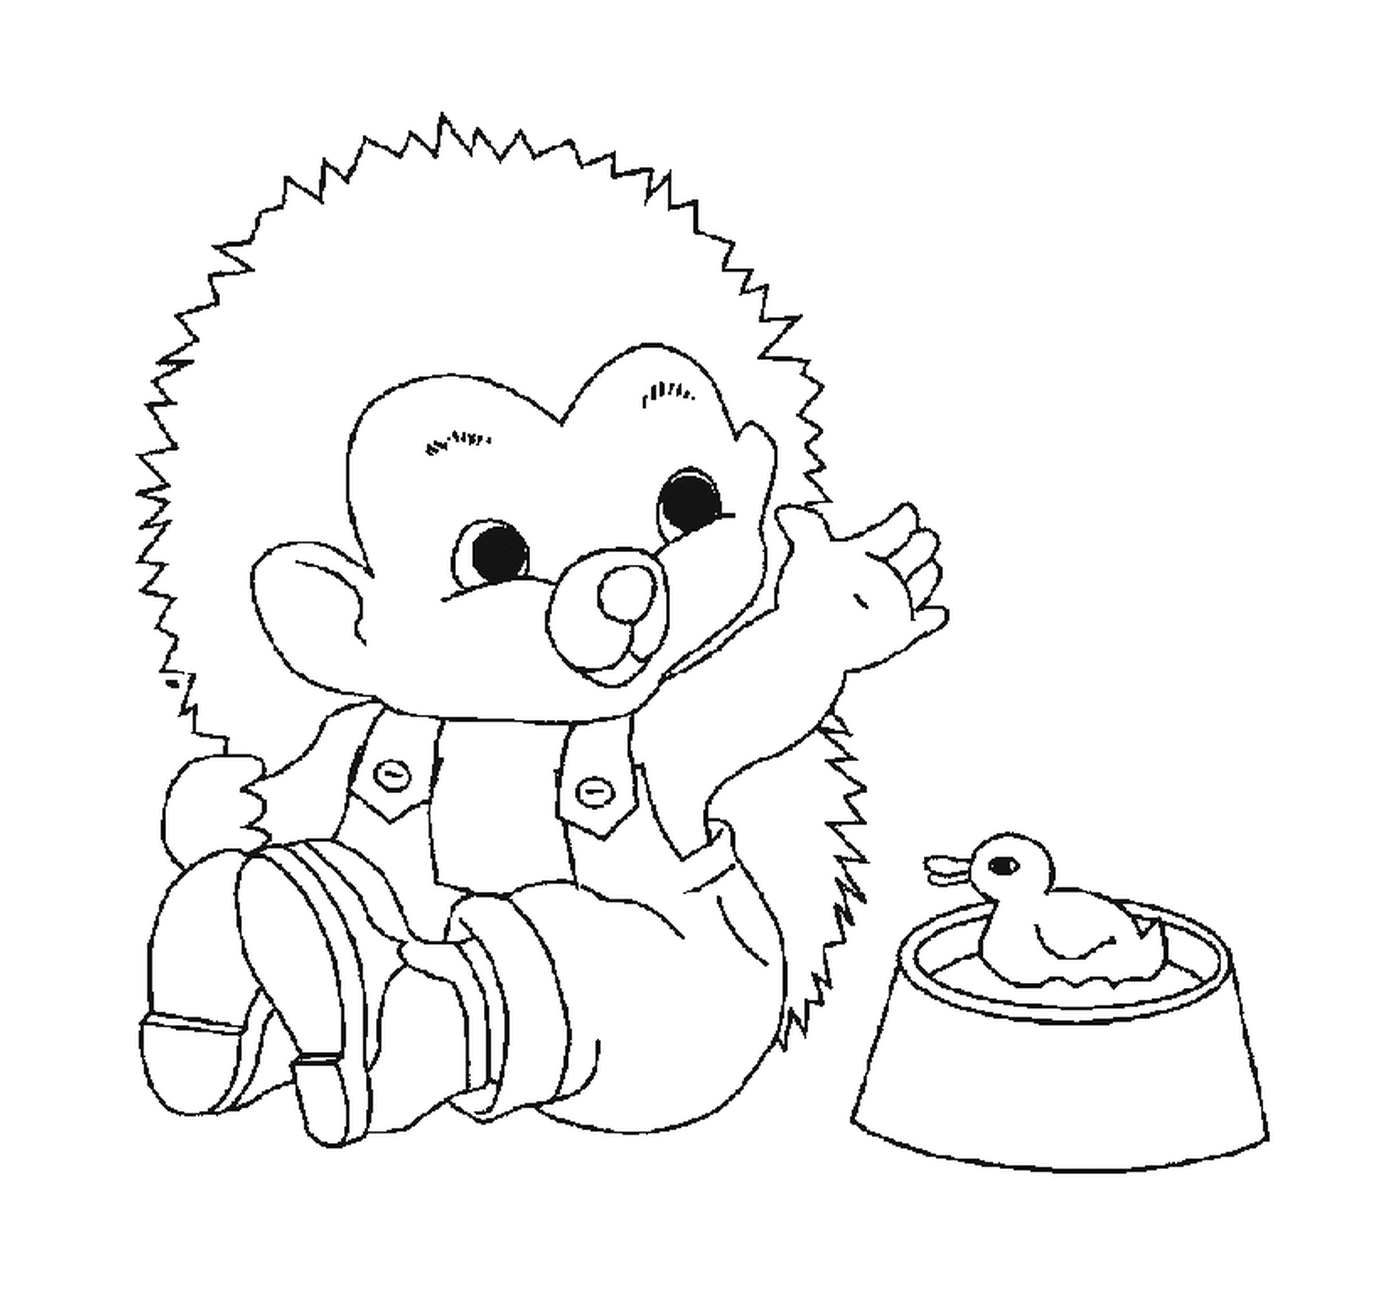  Hedgehog and duck 